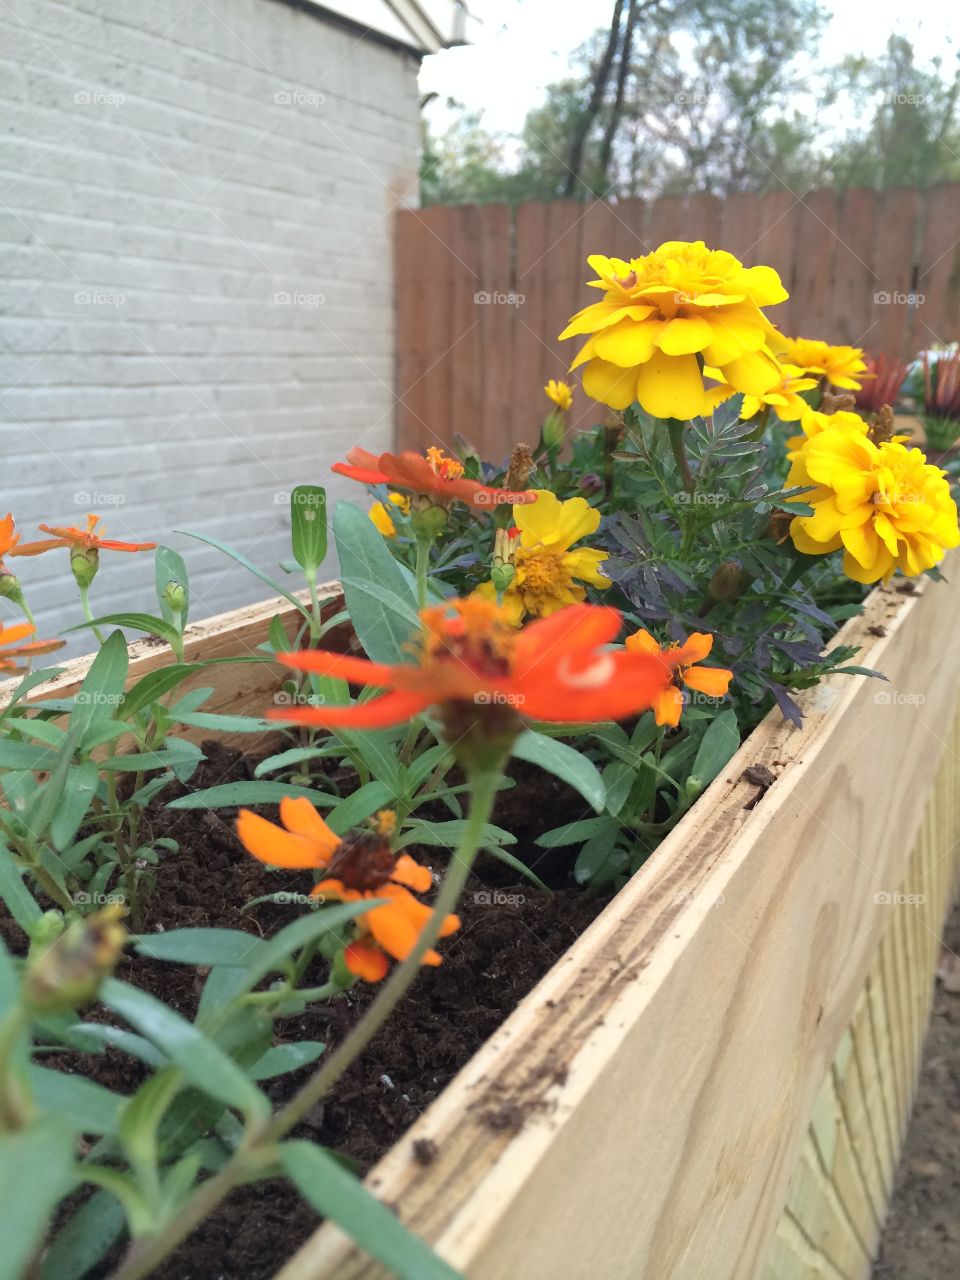 Marigolds on the Fence